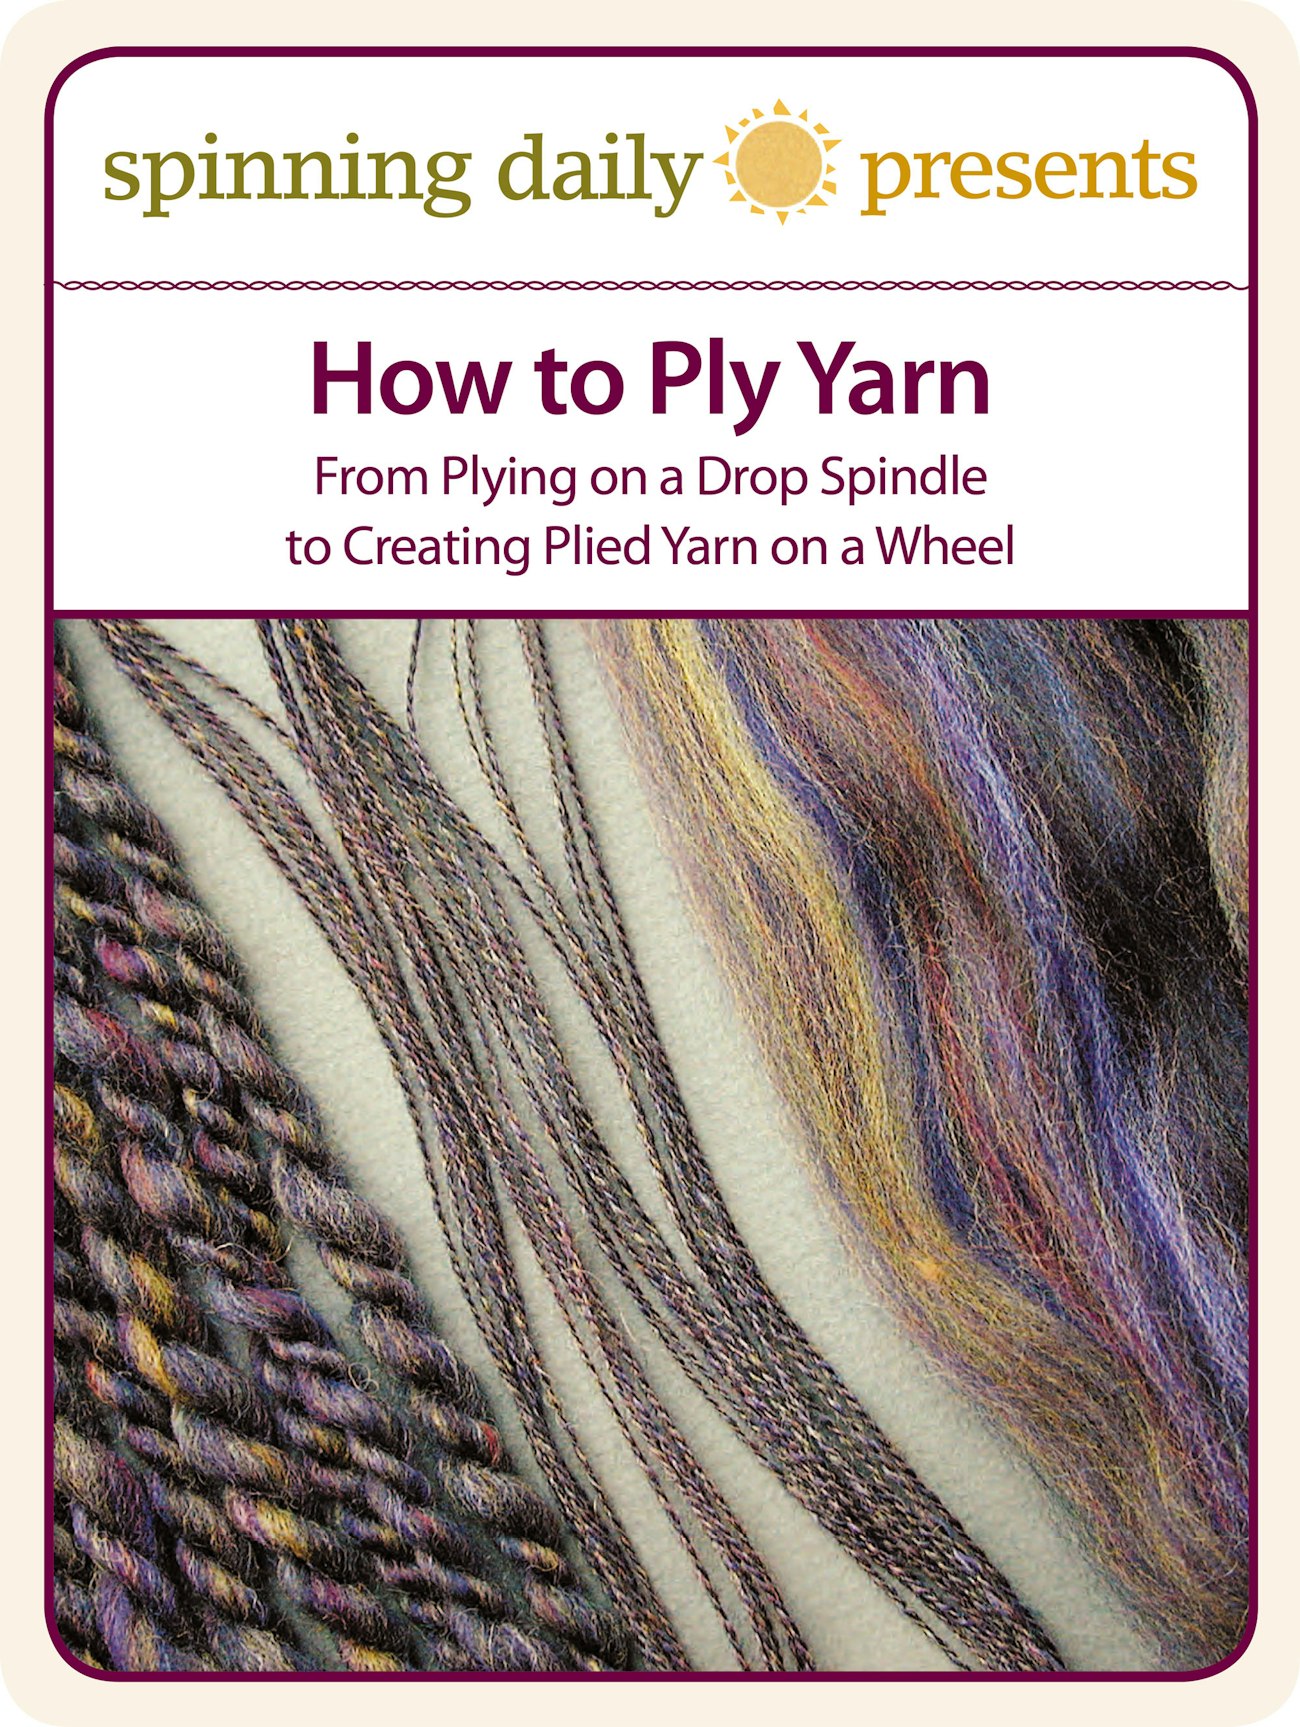 How to ply yarn ebook cover